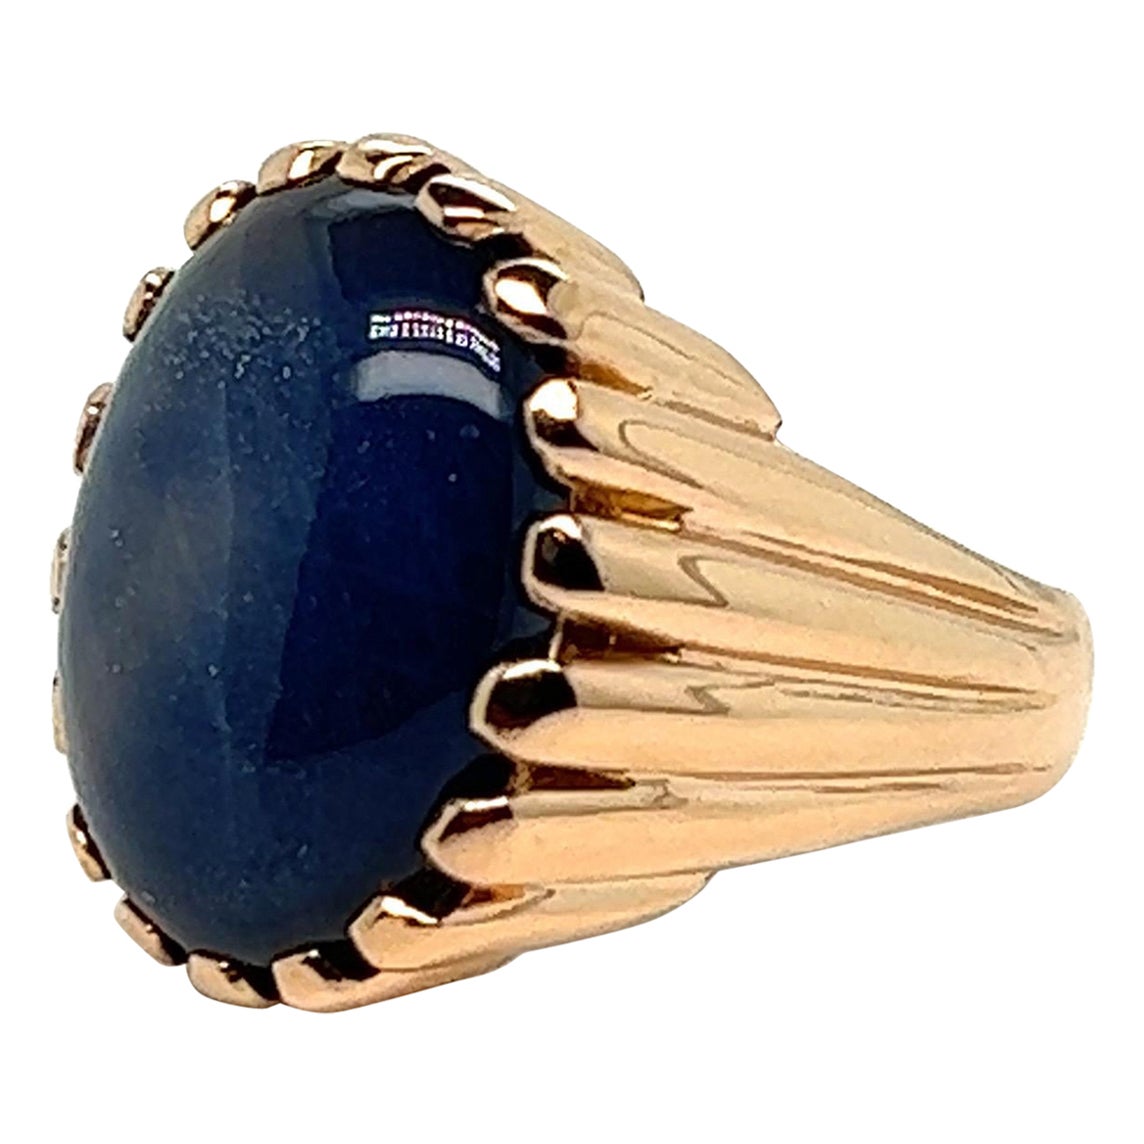 Modern French Chevalière Ring with a Blue Corundum Cabochon